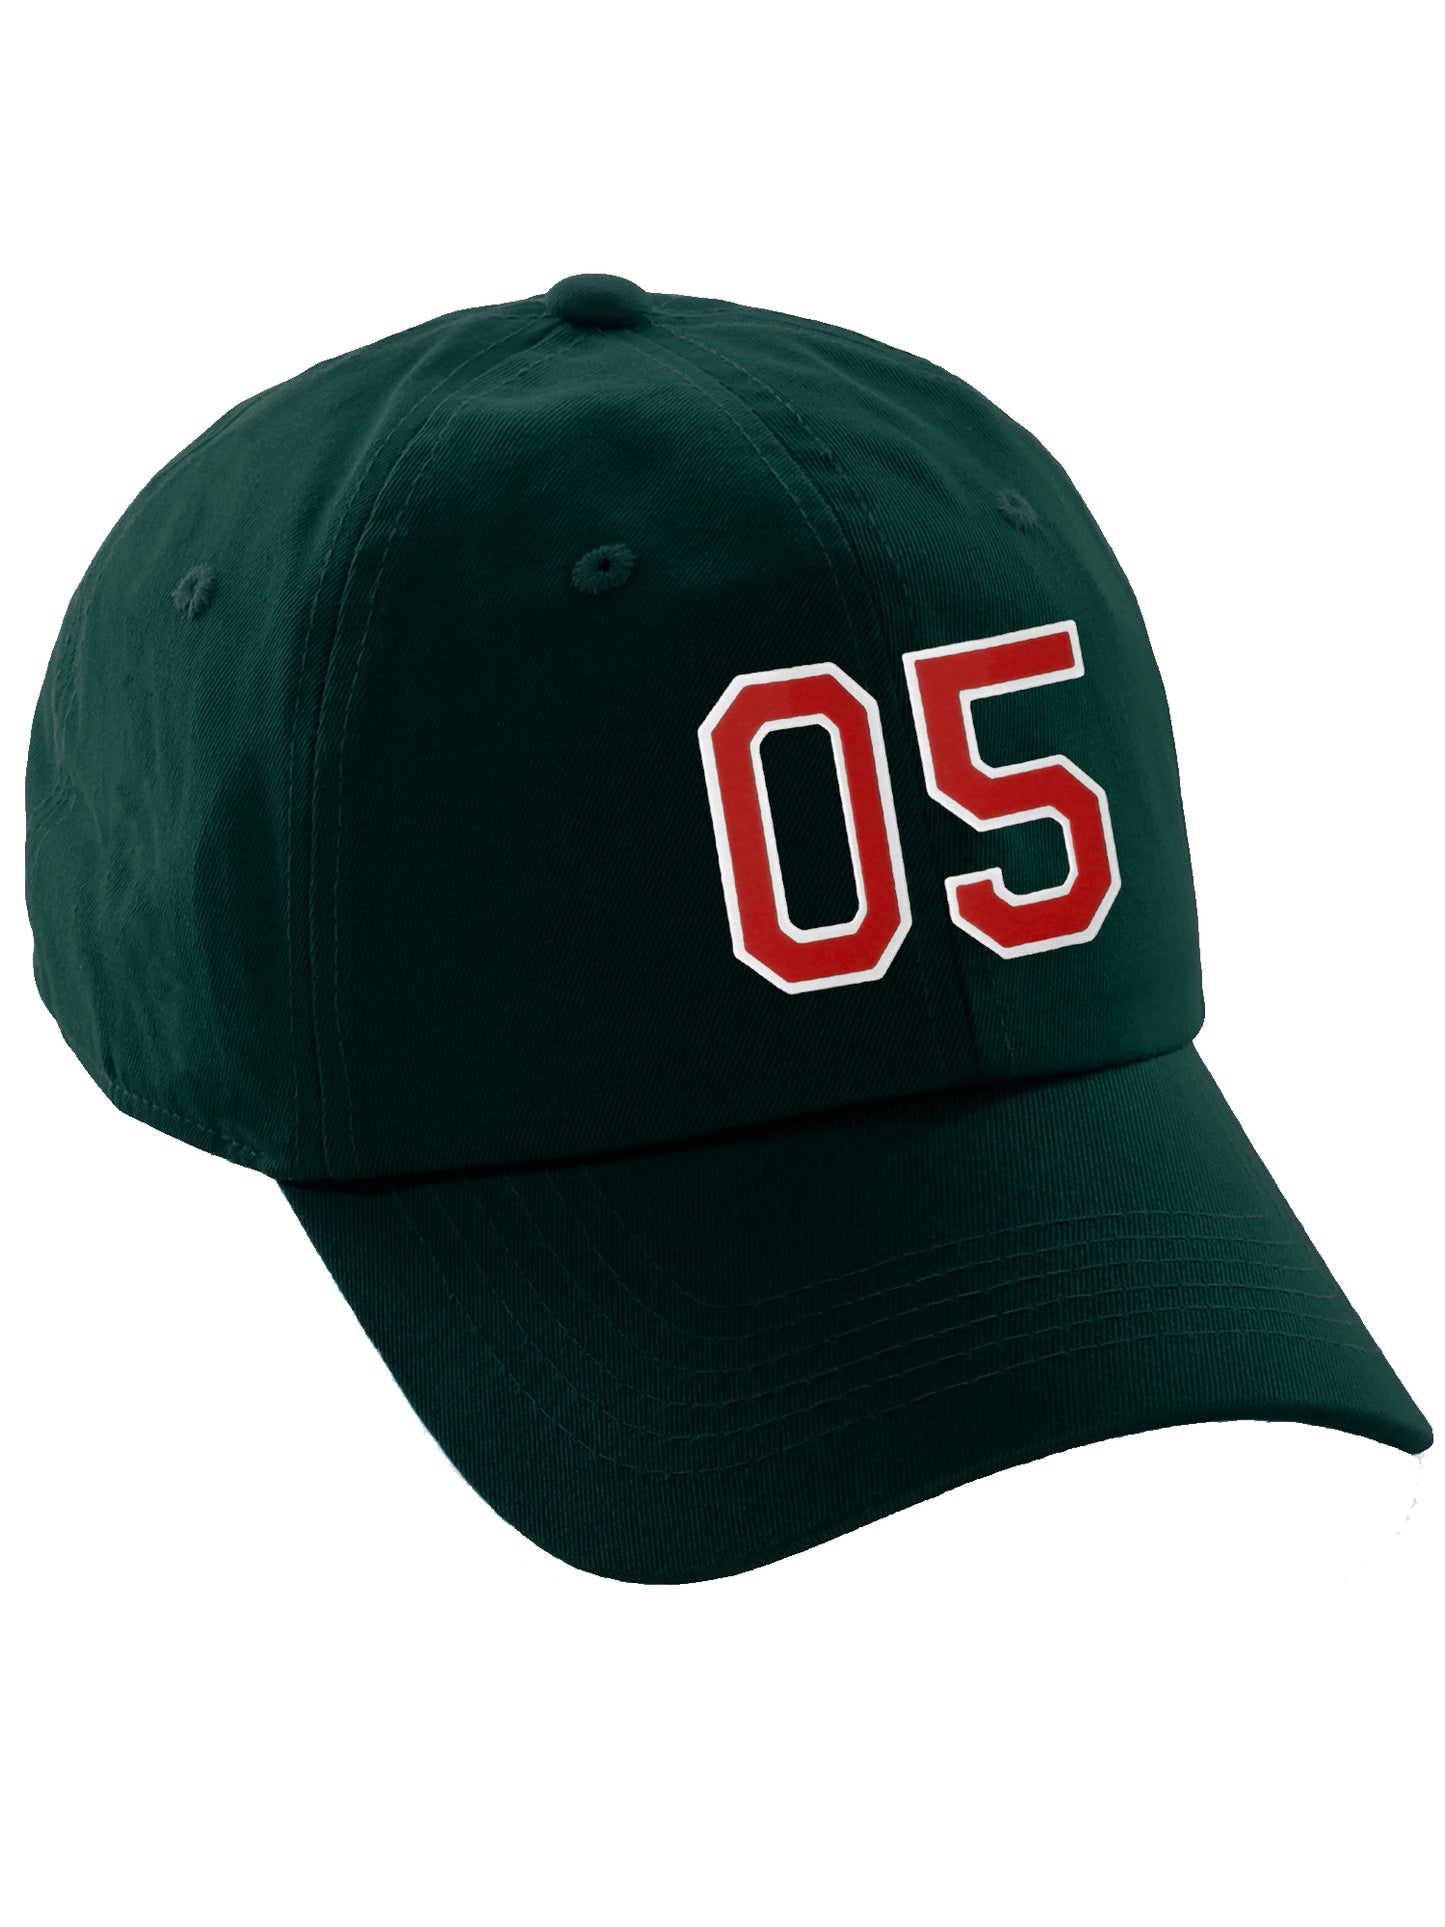 I&W Hatgear Customized Number Hat 00 to 99 Team Colors Baseball Cap, Dk Green Hat White Red